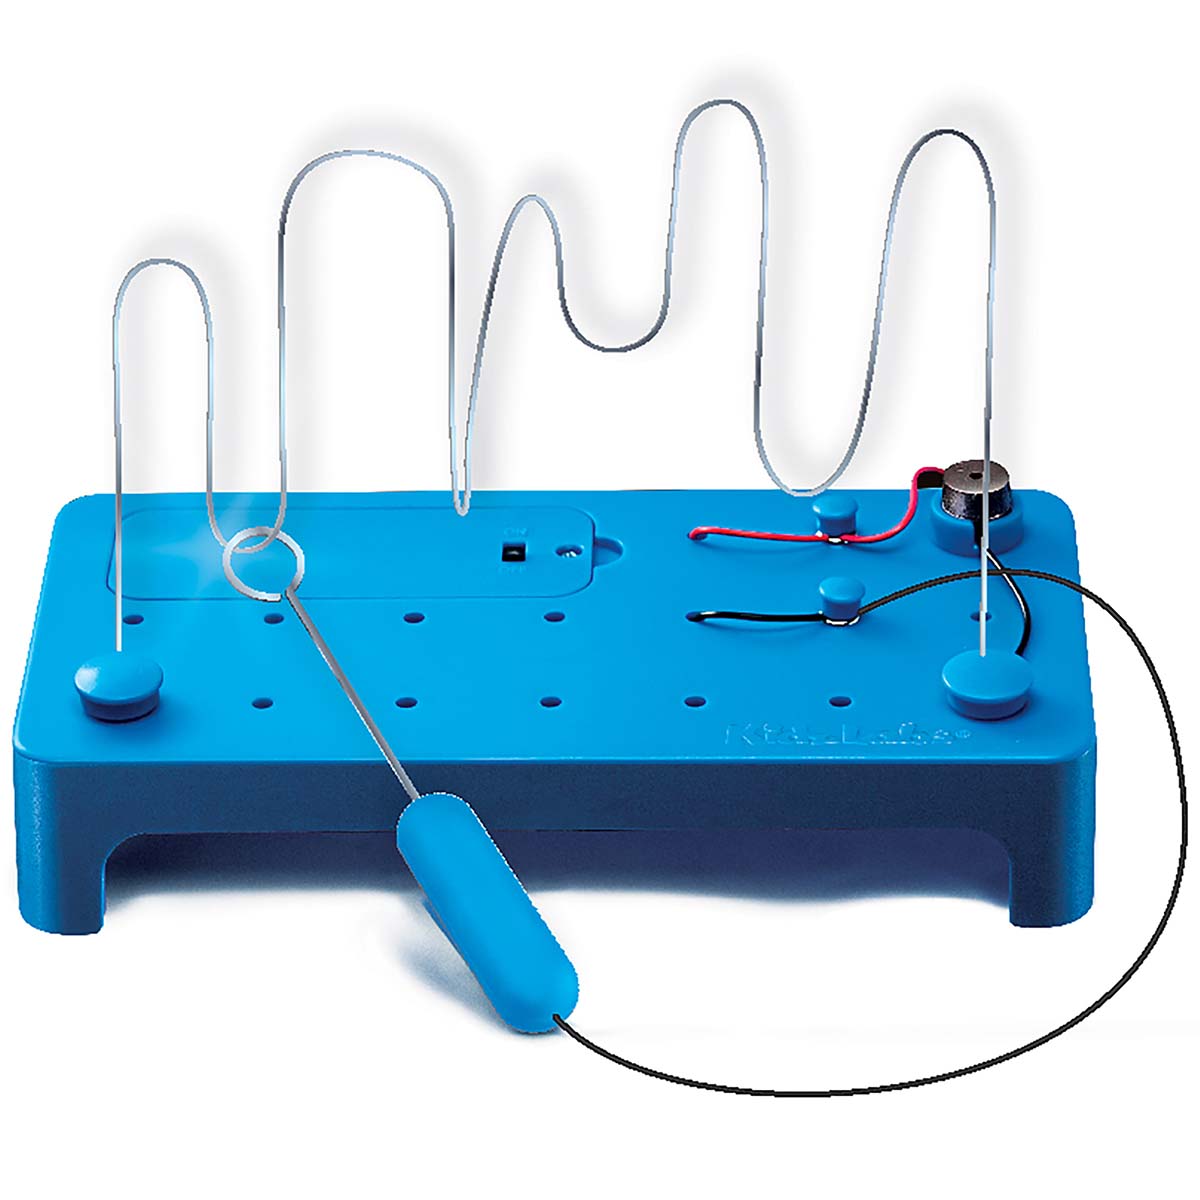 Science Museum Buzz Wire Making Kit